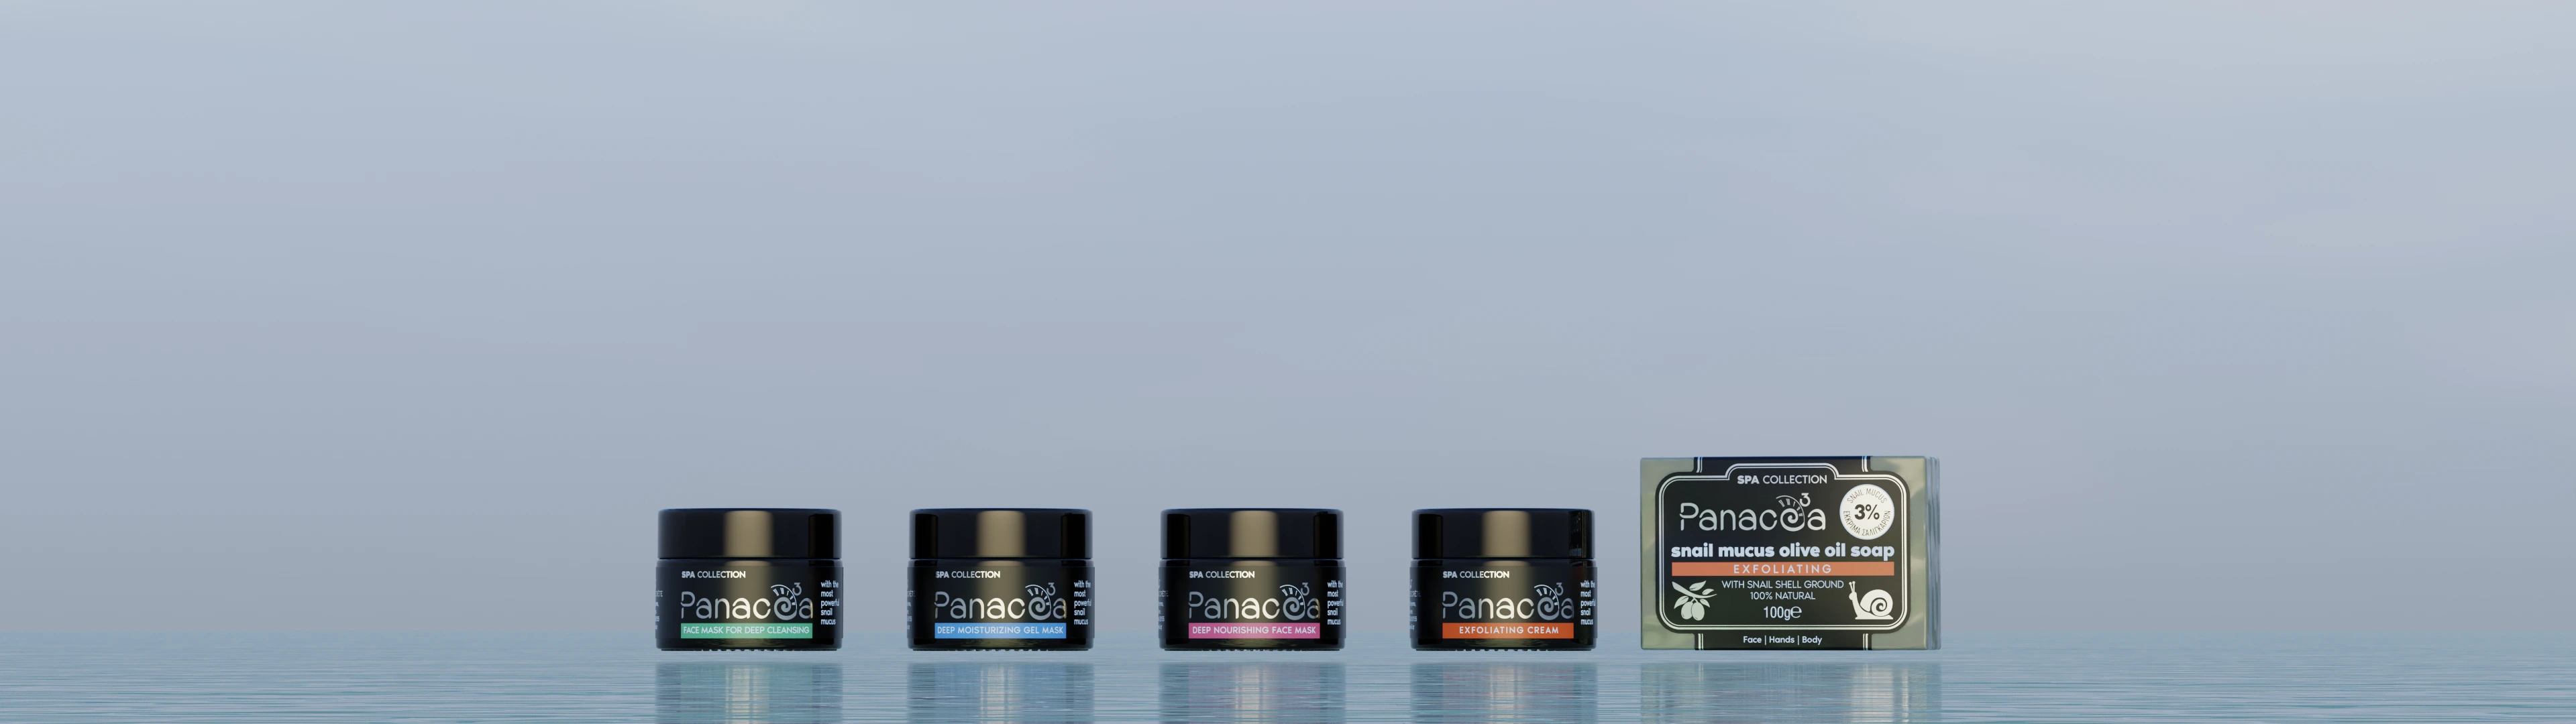 Panacea3 Spa Collection cosmetics from snail secretion